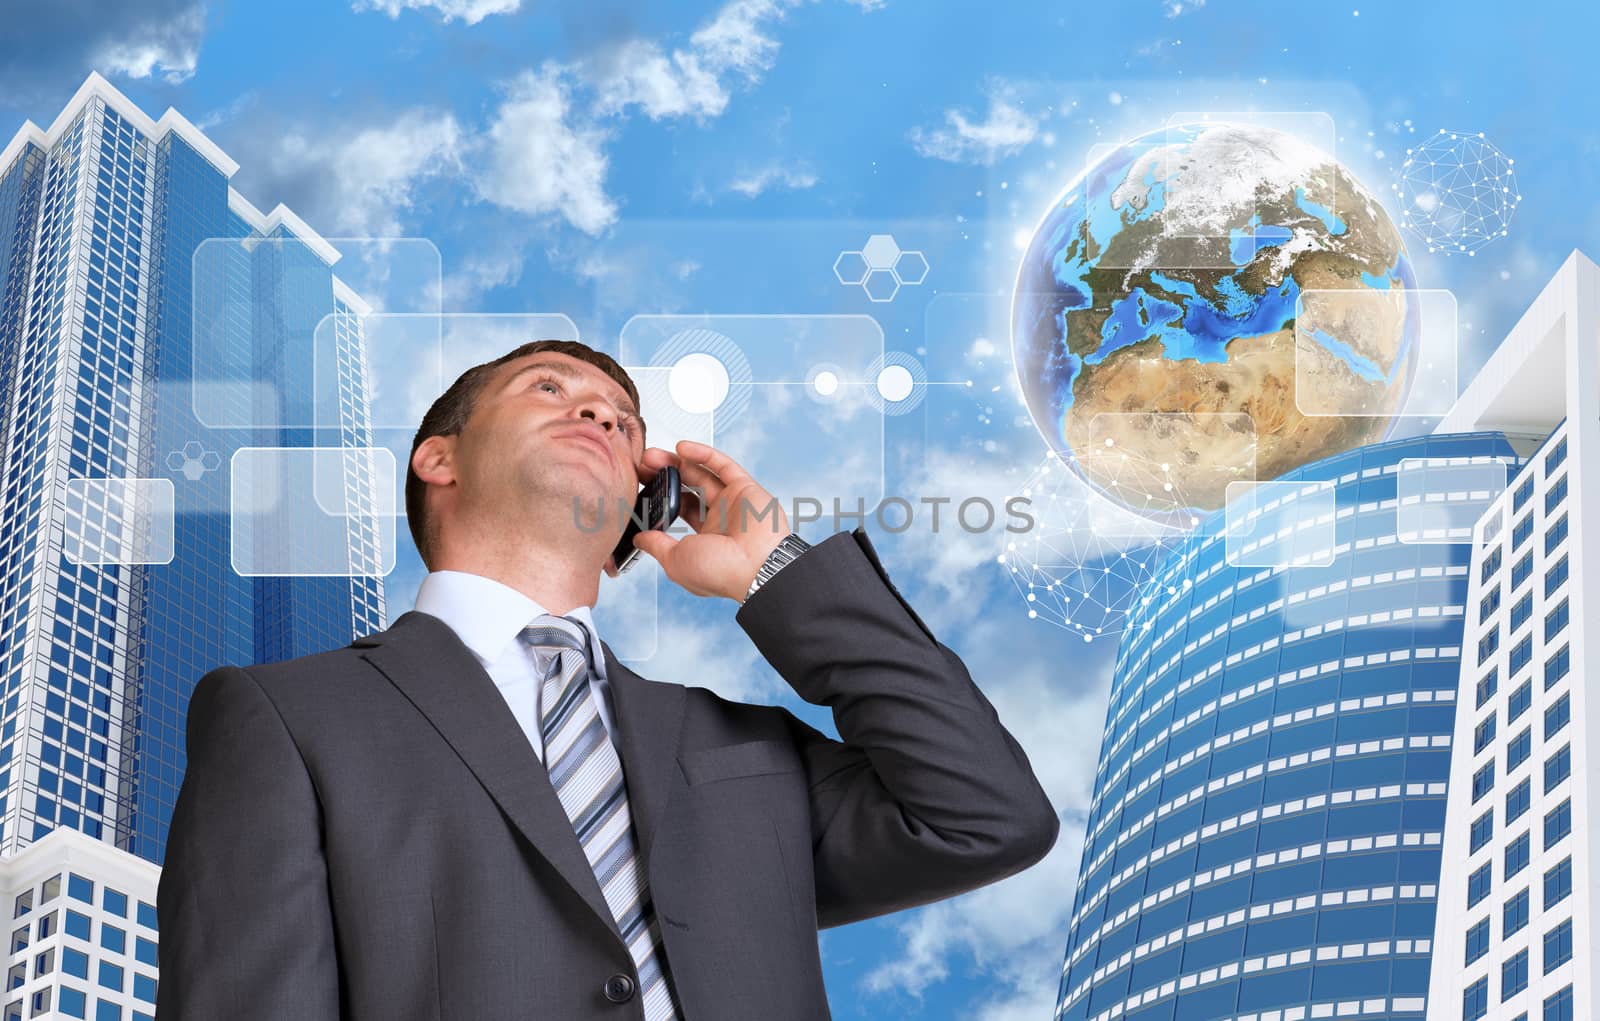 Businessman talking on the phone. Skyscrapers and Earth with transparent rectangles. Element of this image furnished by NASA